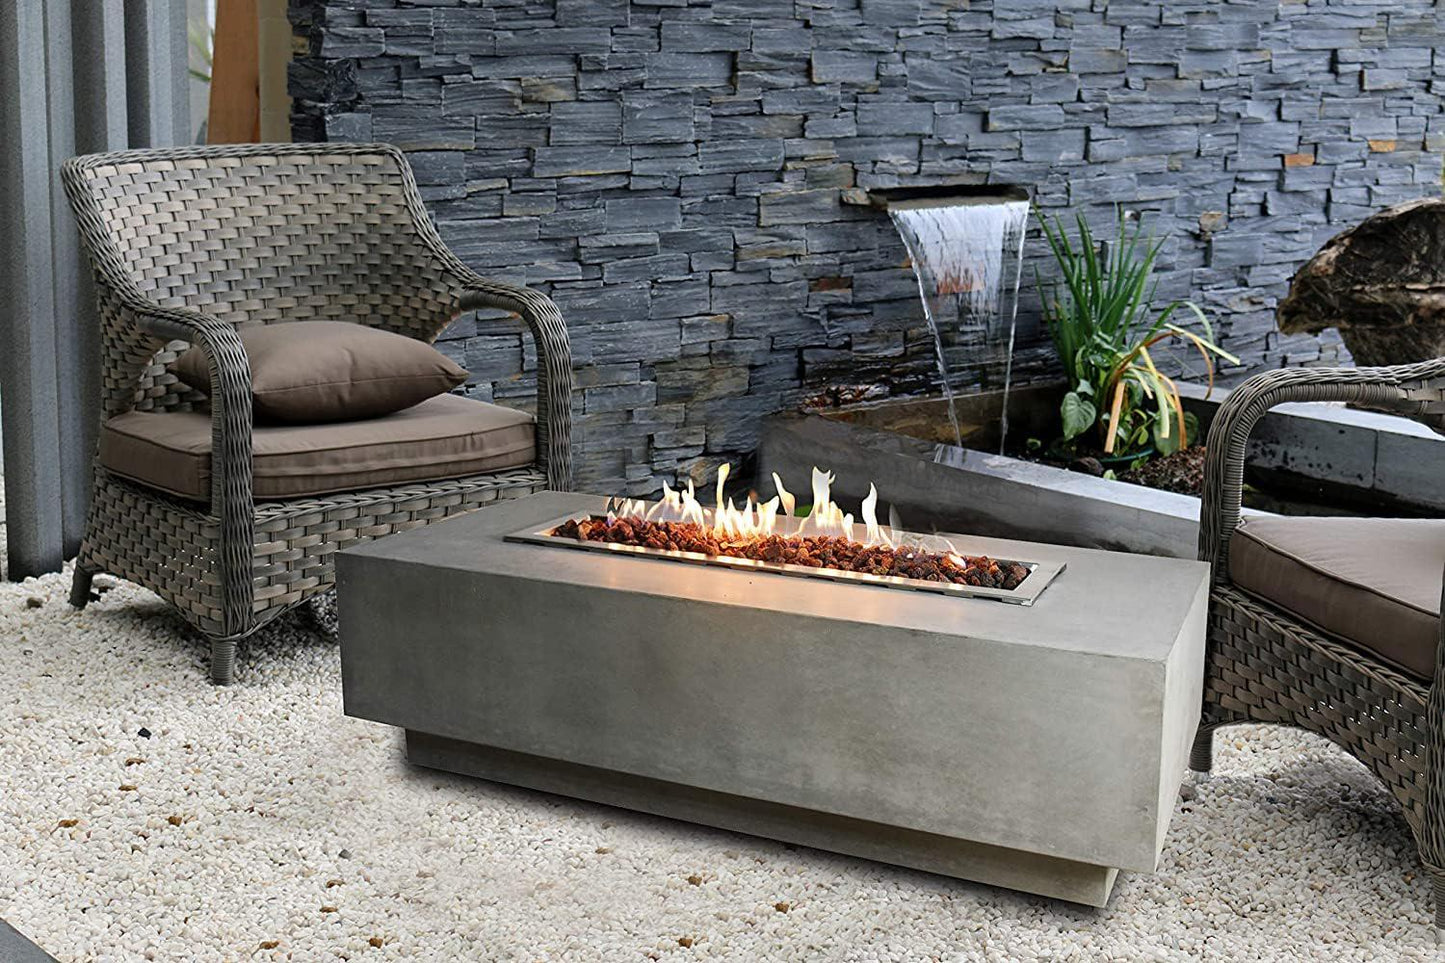 AMS Fireplace | Elementi | Large Gas Fire Pit Table for Outside Patio | Cover and Lava Rocks Included | Free Bio-Ethanol Tabletop Lantern | Fuel: Natural Gas, Granville - Light Grey